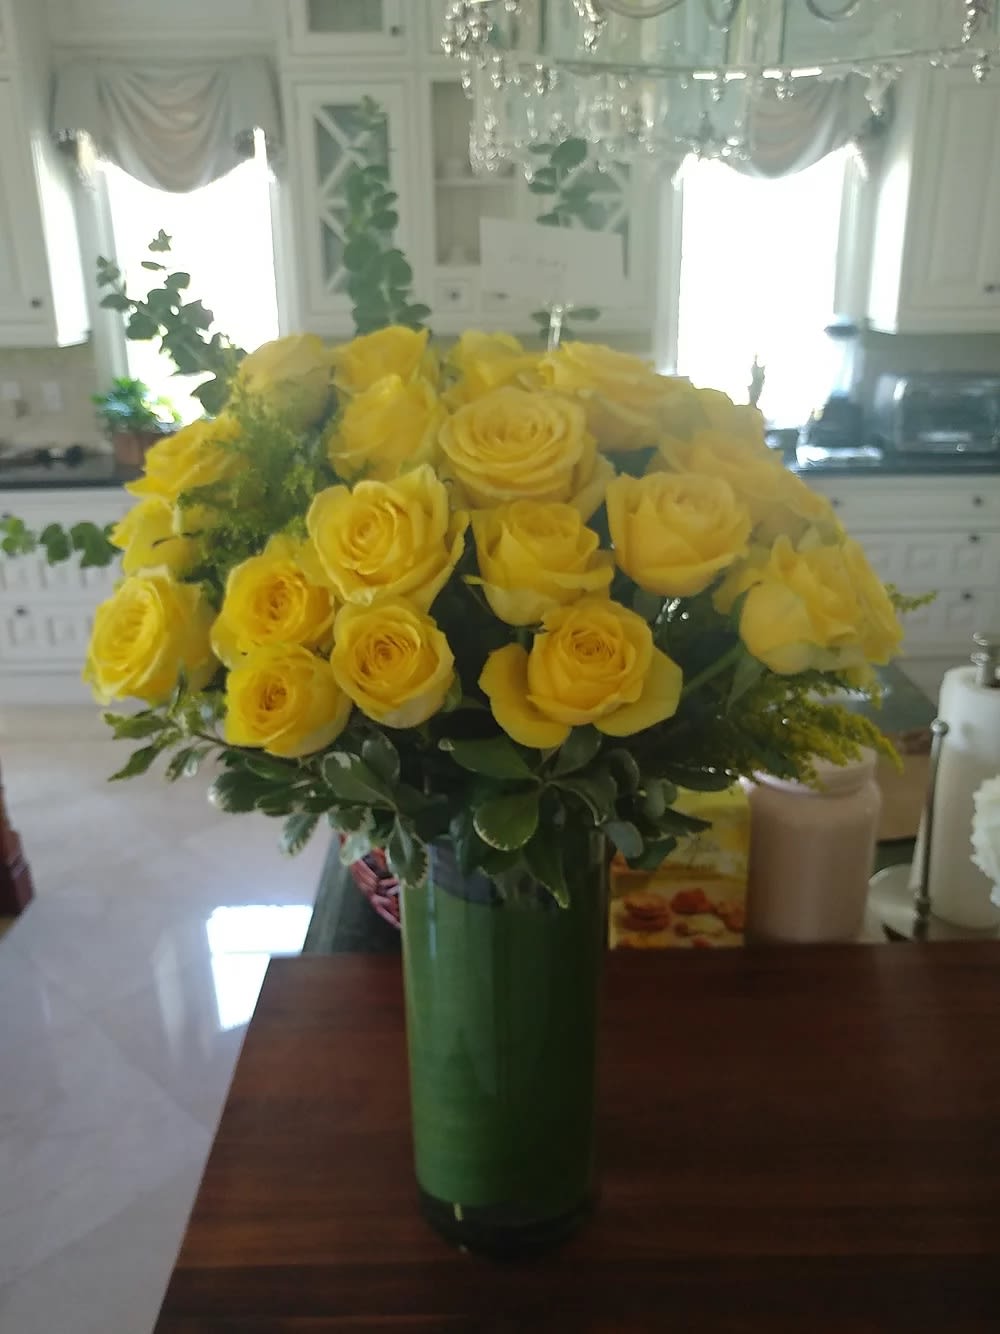 A bouquet of fresh, radiant yellow roses is a timeless gift. Show